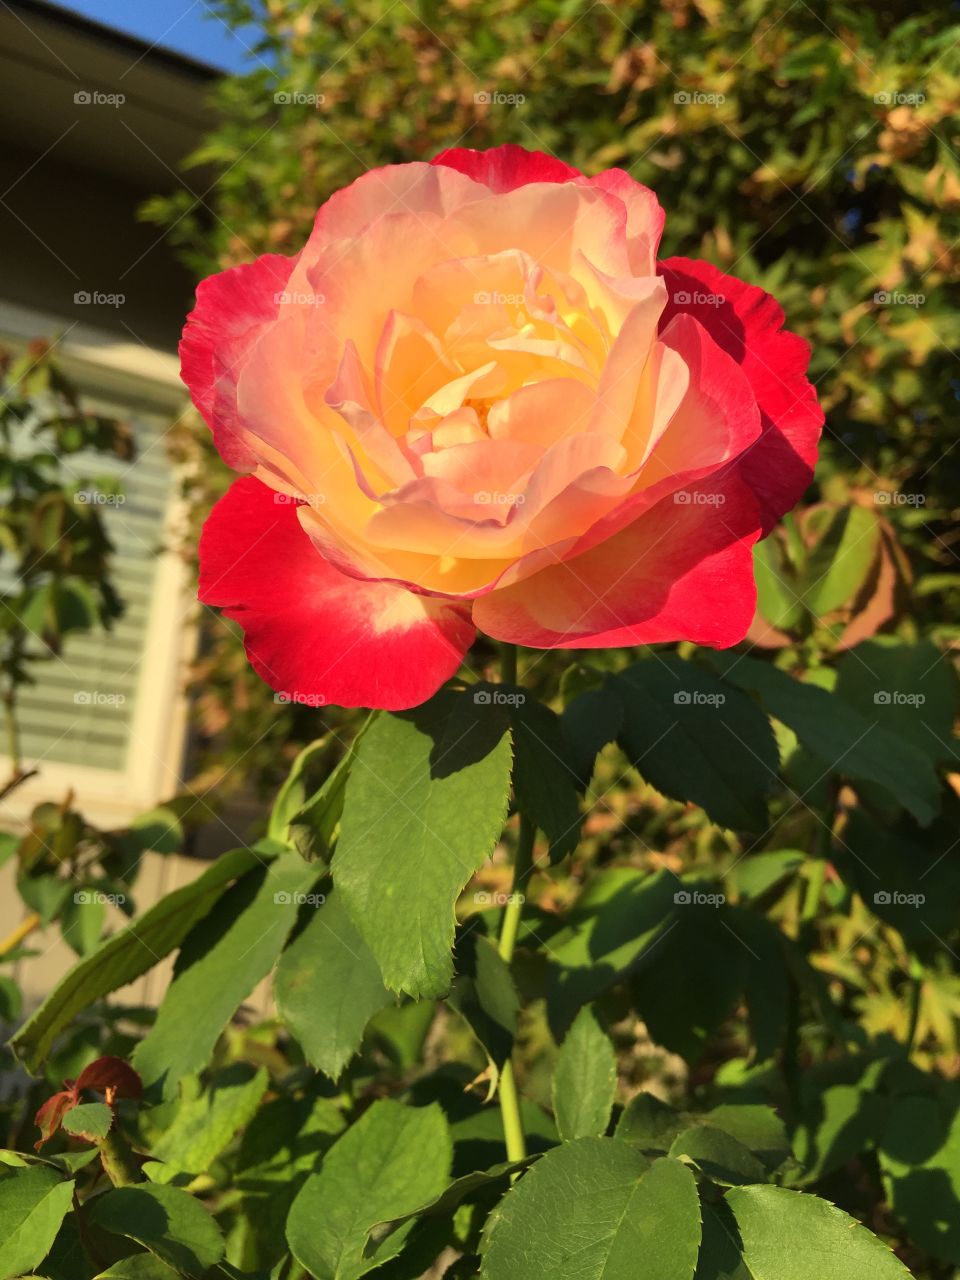 Colorful flower at sunset . Just a simple a rose at sunset in the garden 